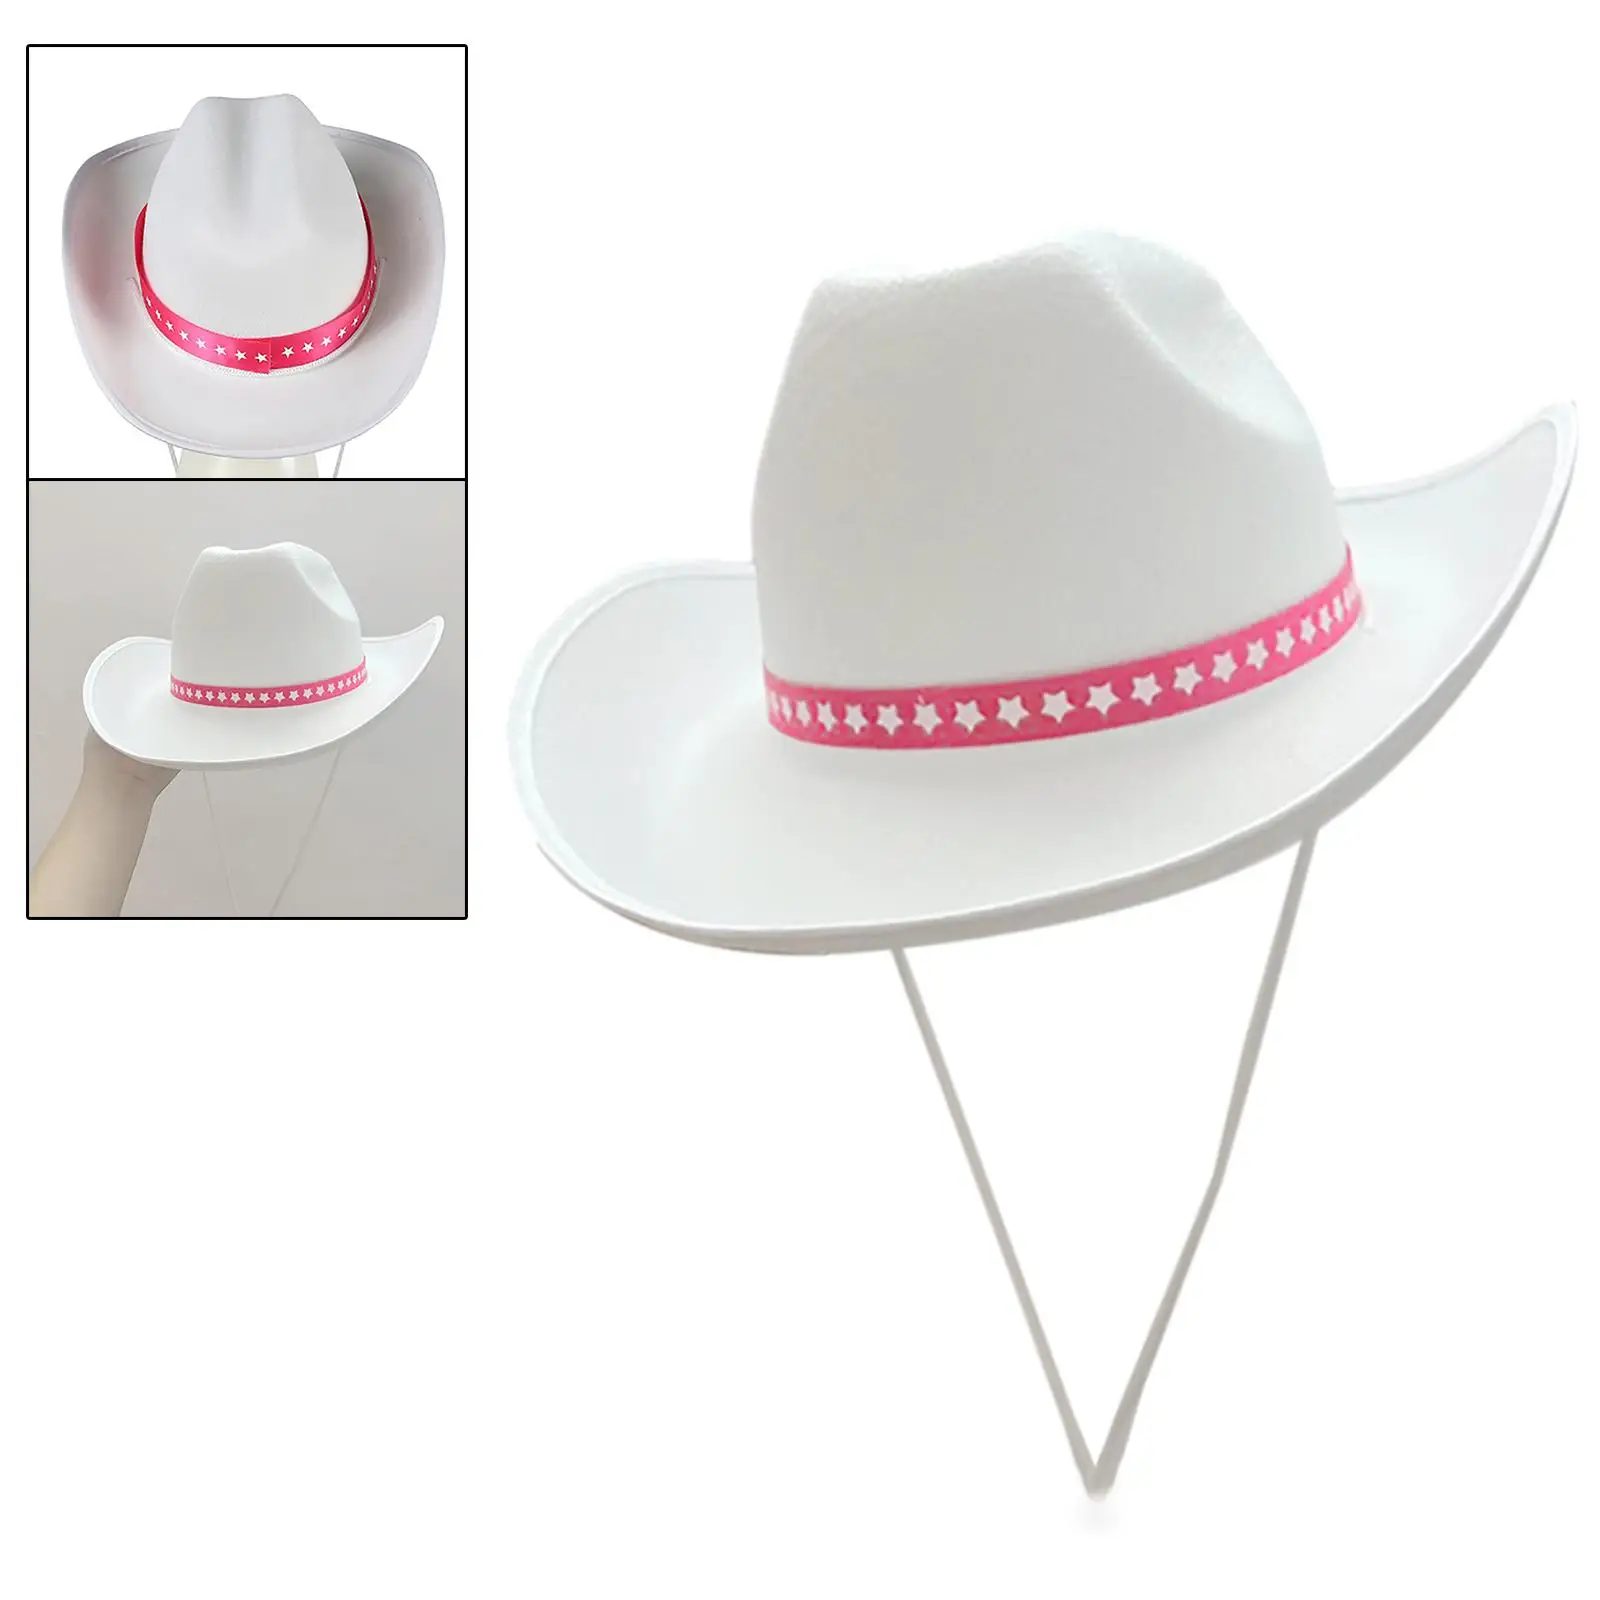 Cowboy Hat Trendy Durable Women Lightweight Sunhat for Hiking Party Holidays